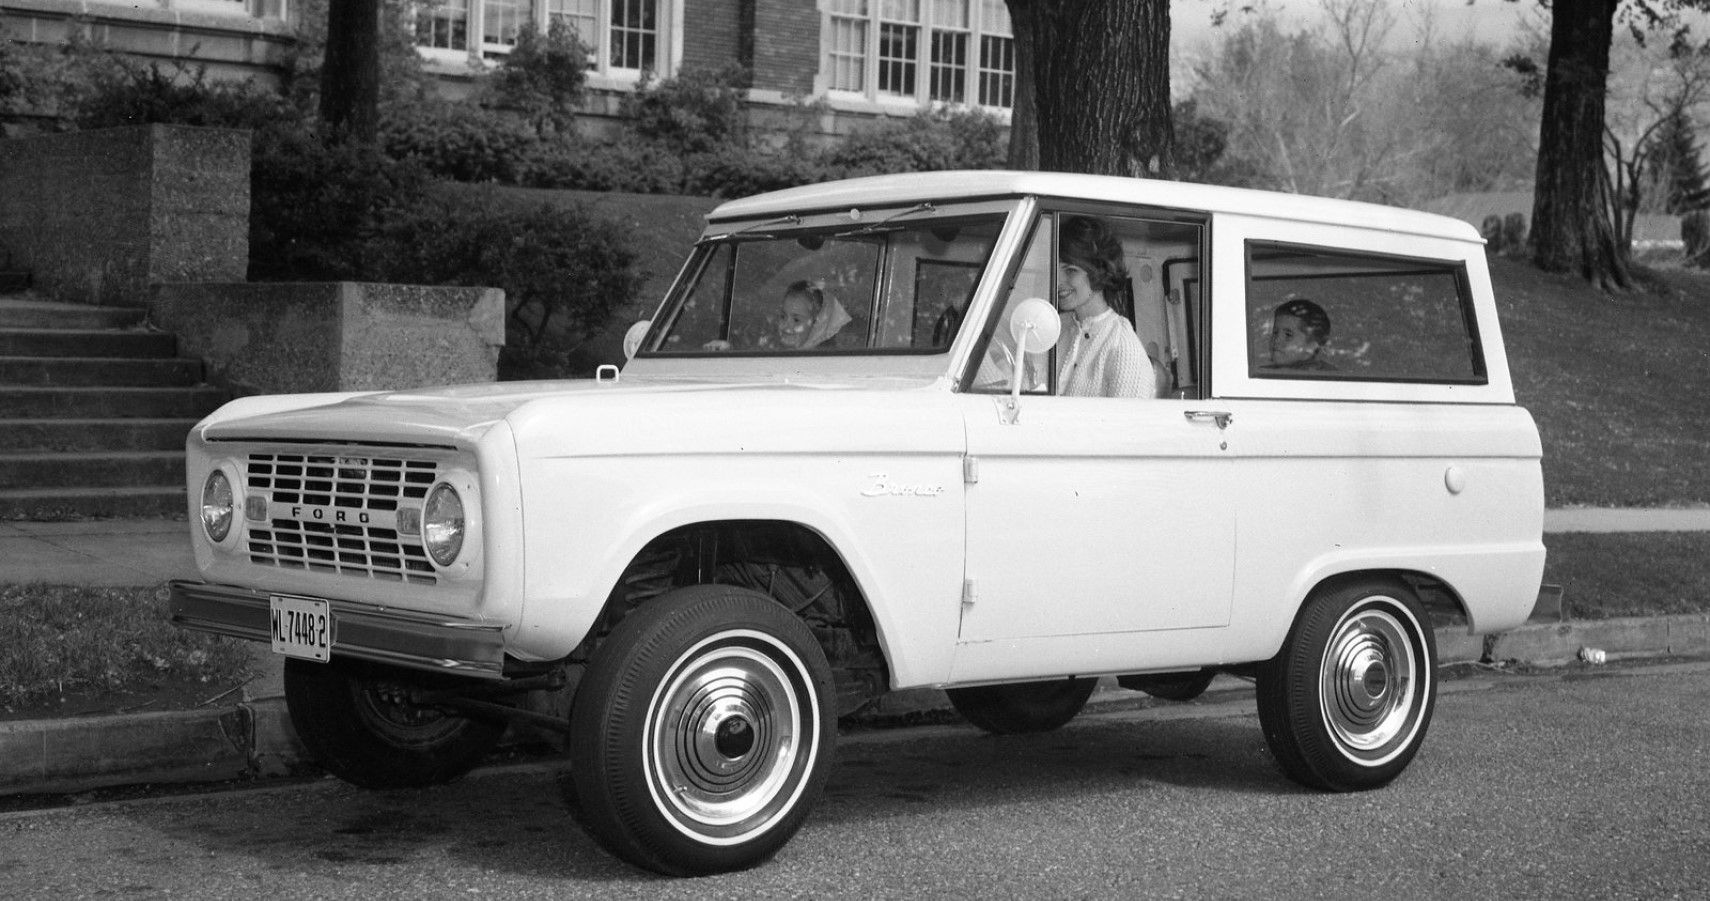 1966 Ford Bronco front third quarter view